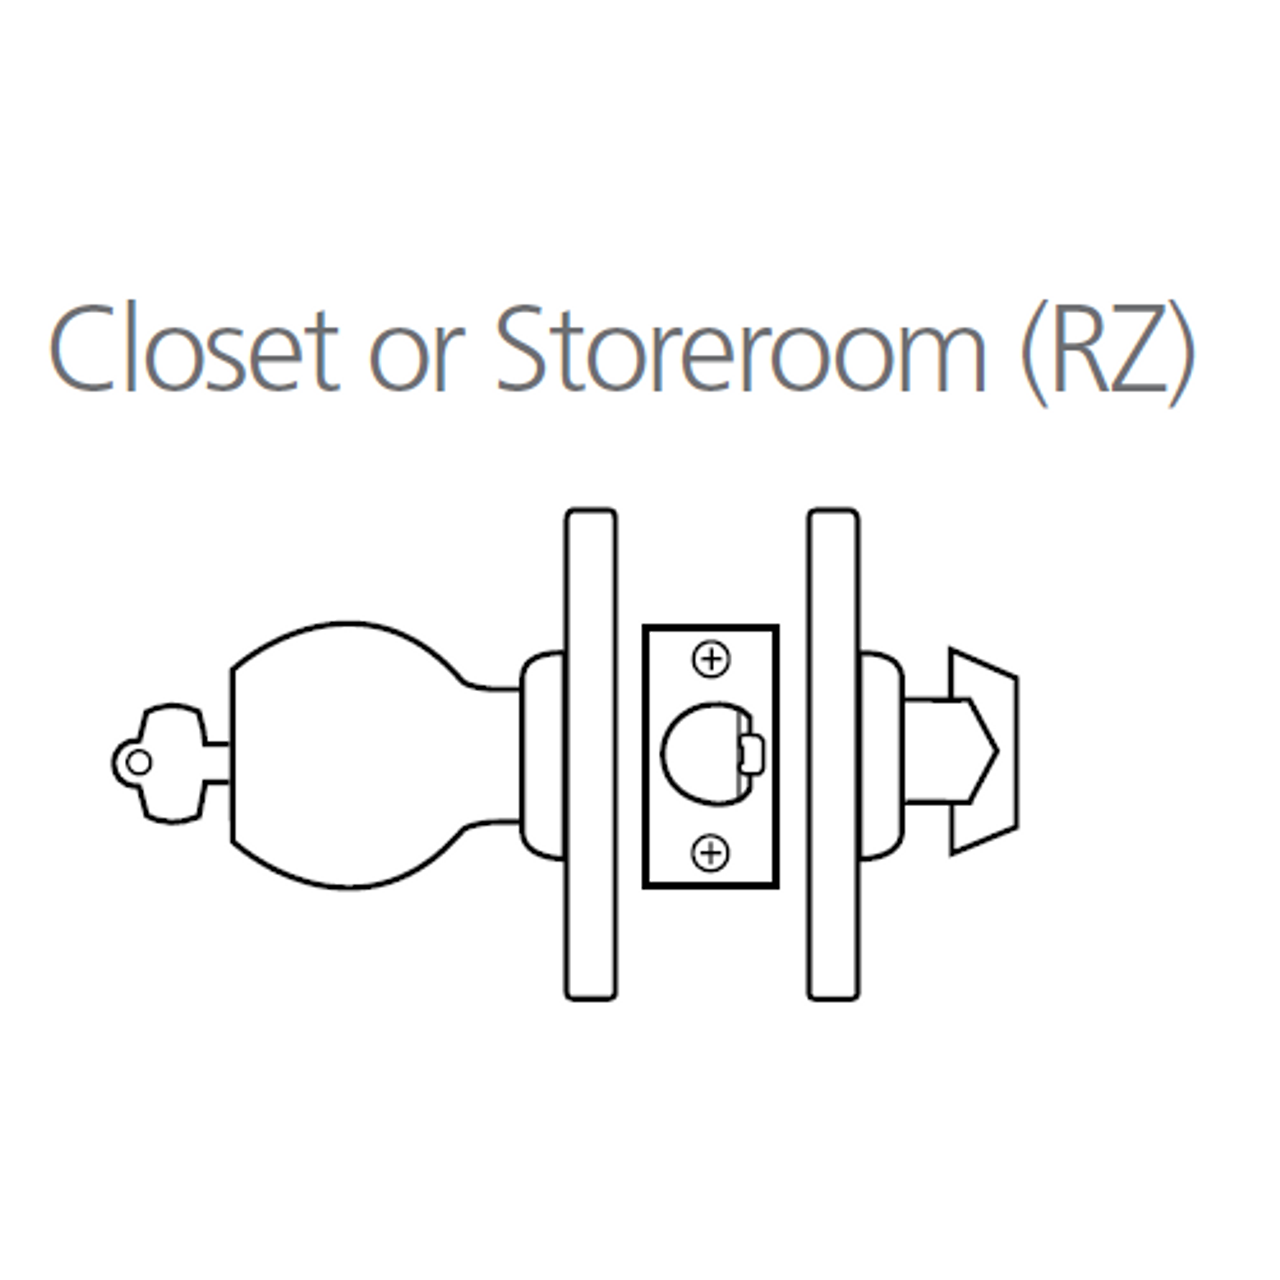 8K37RZ4AS3625 Best 8K Series Closet or Storeroom Heavy Duty Cylindrical Knob Locks with Round Style in Bright Chrome